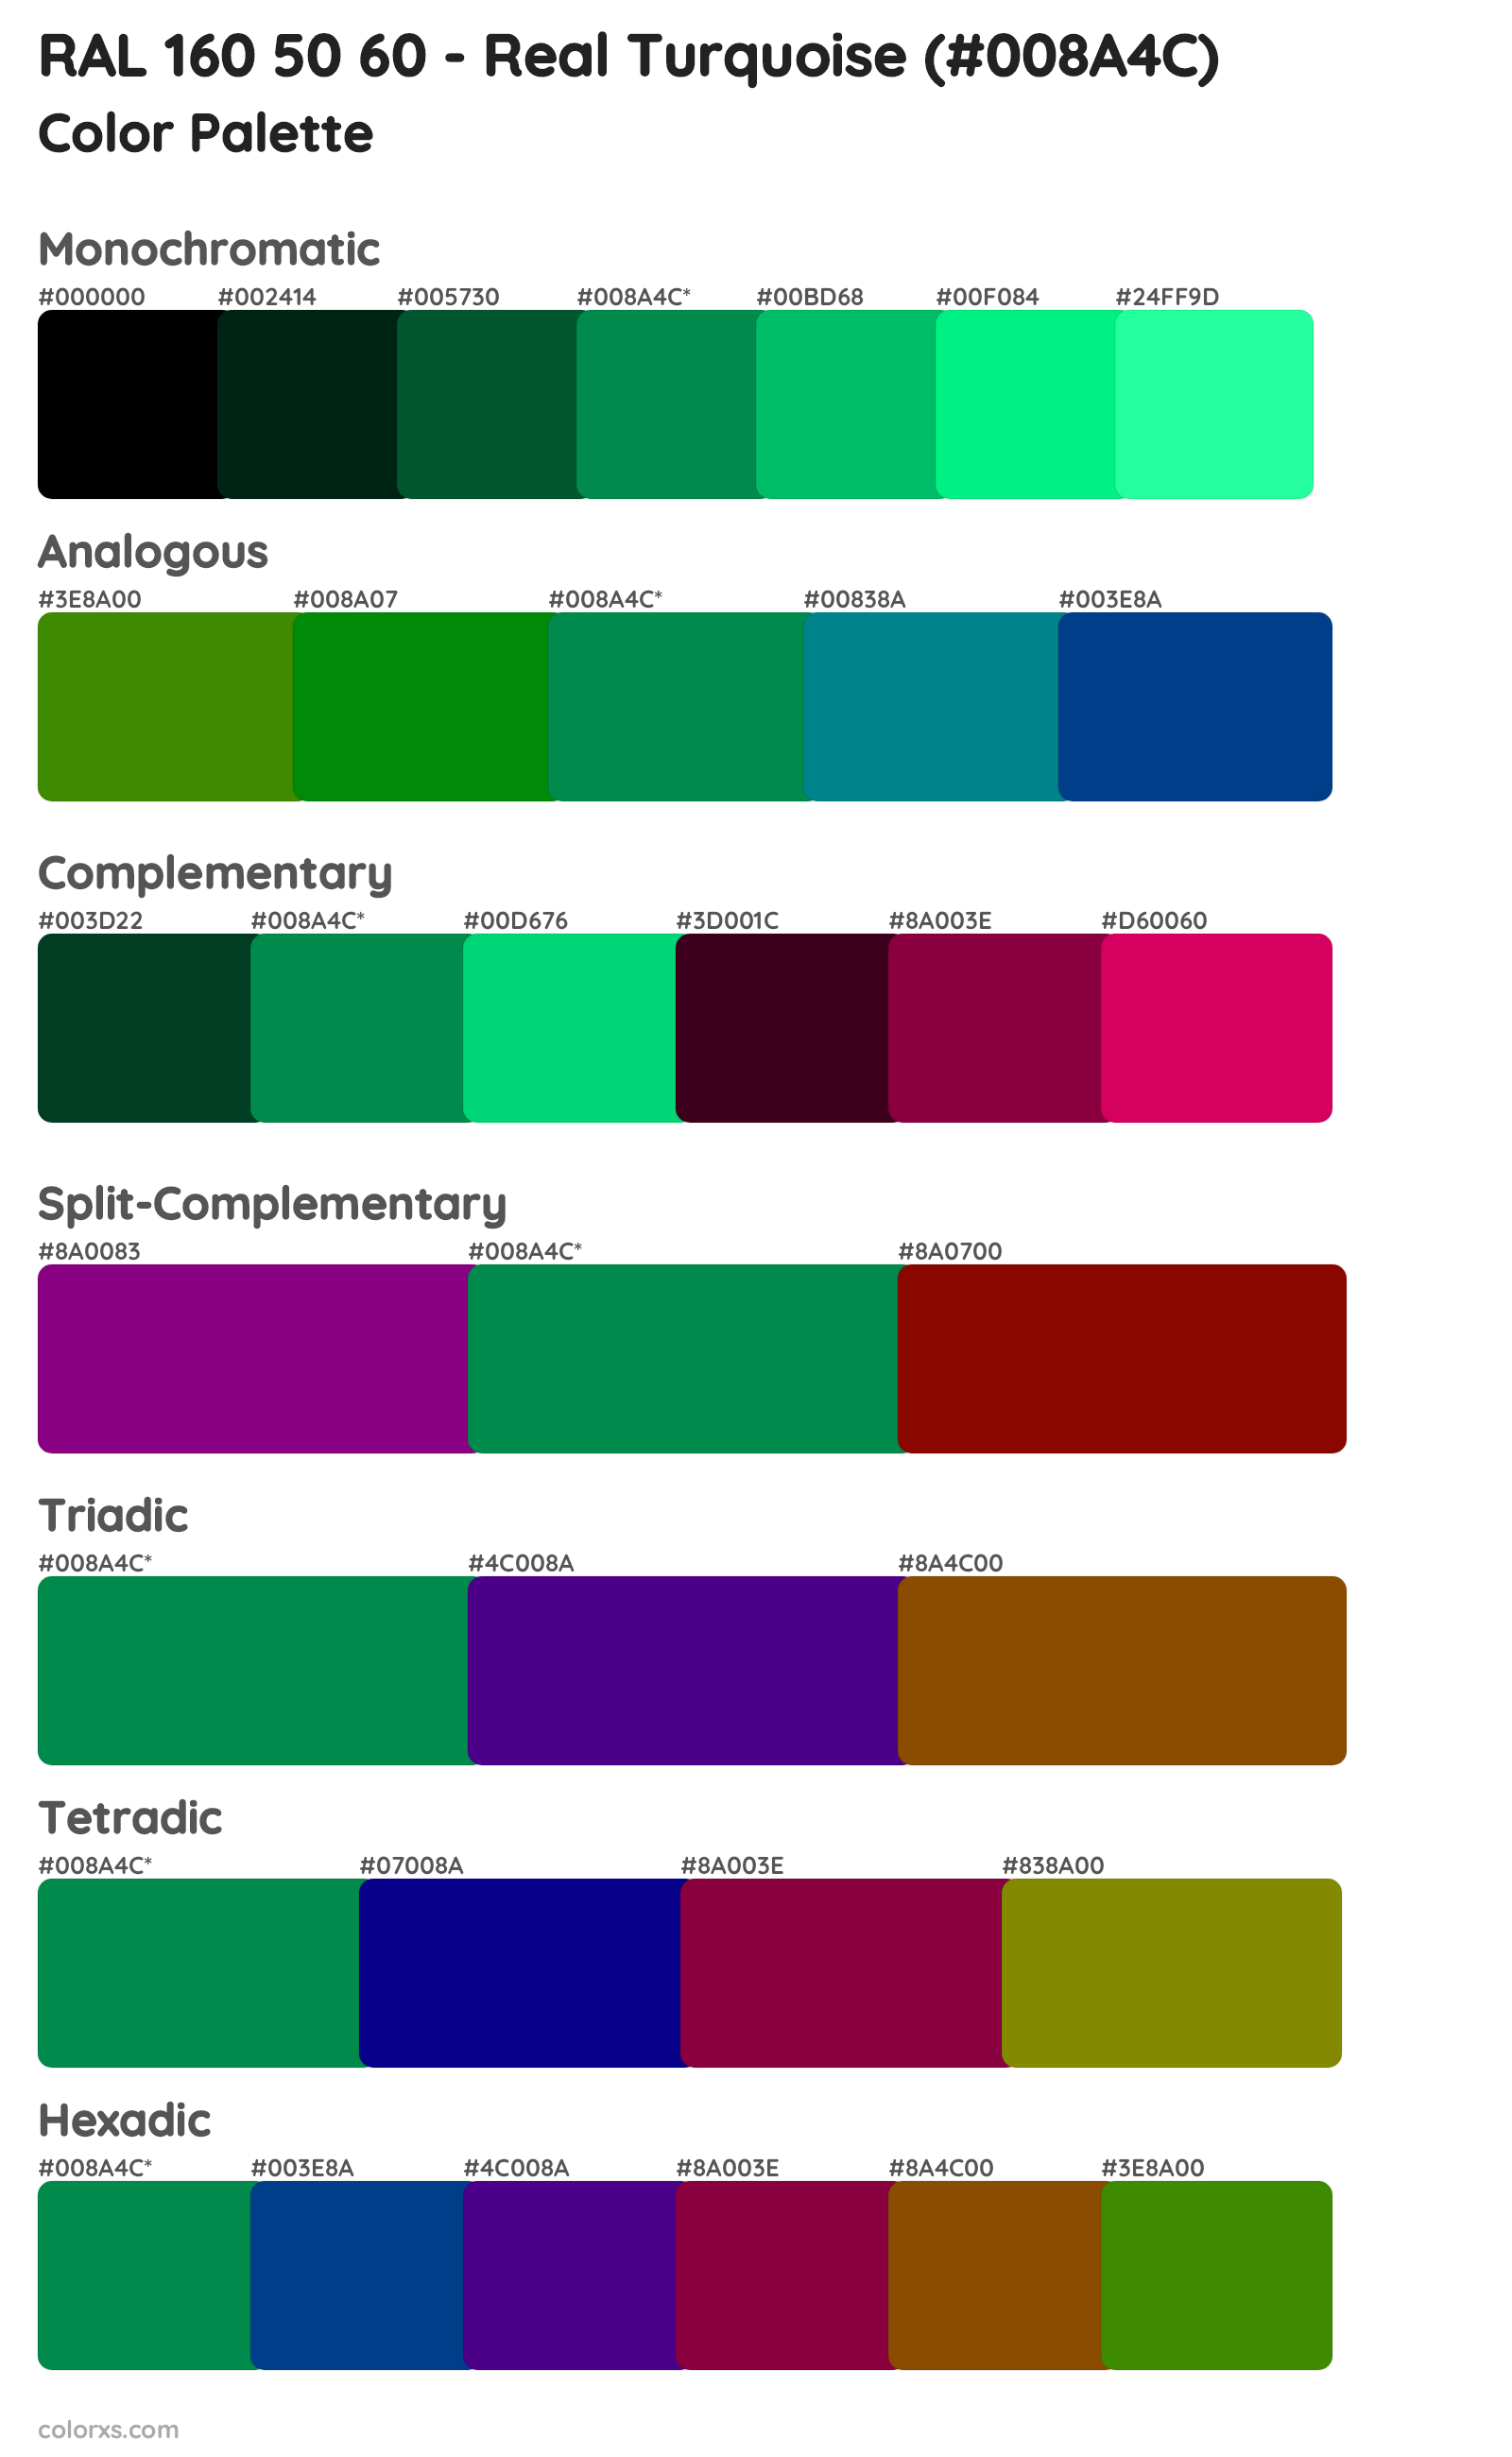 RAL 160 50 60 - Real Turquoise Color Scheme Palettes